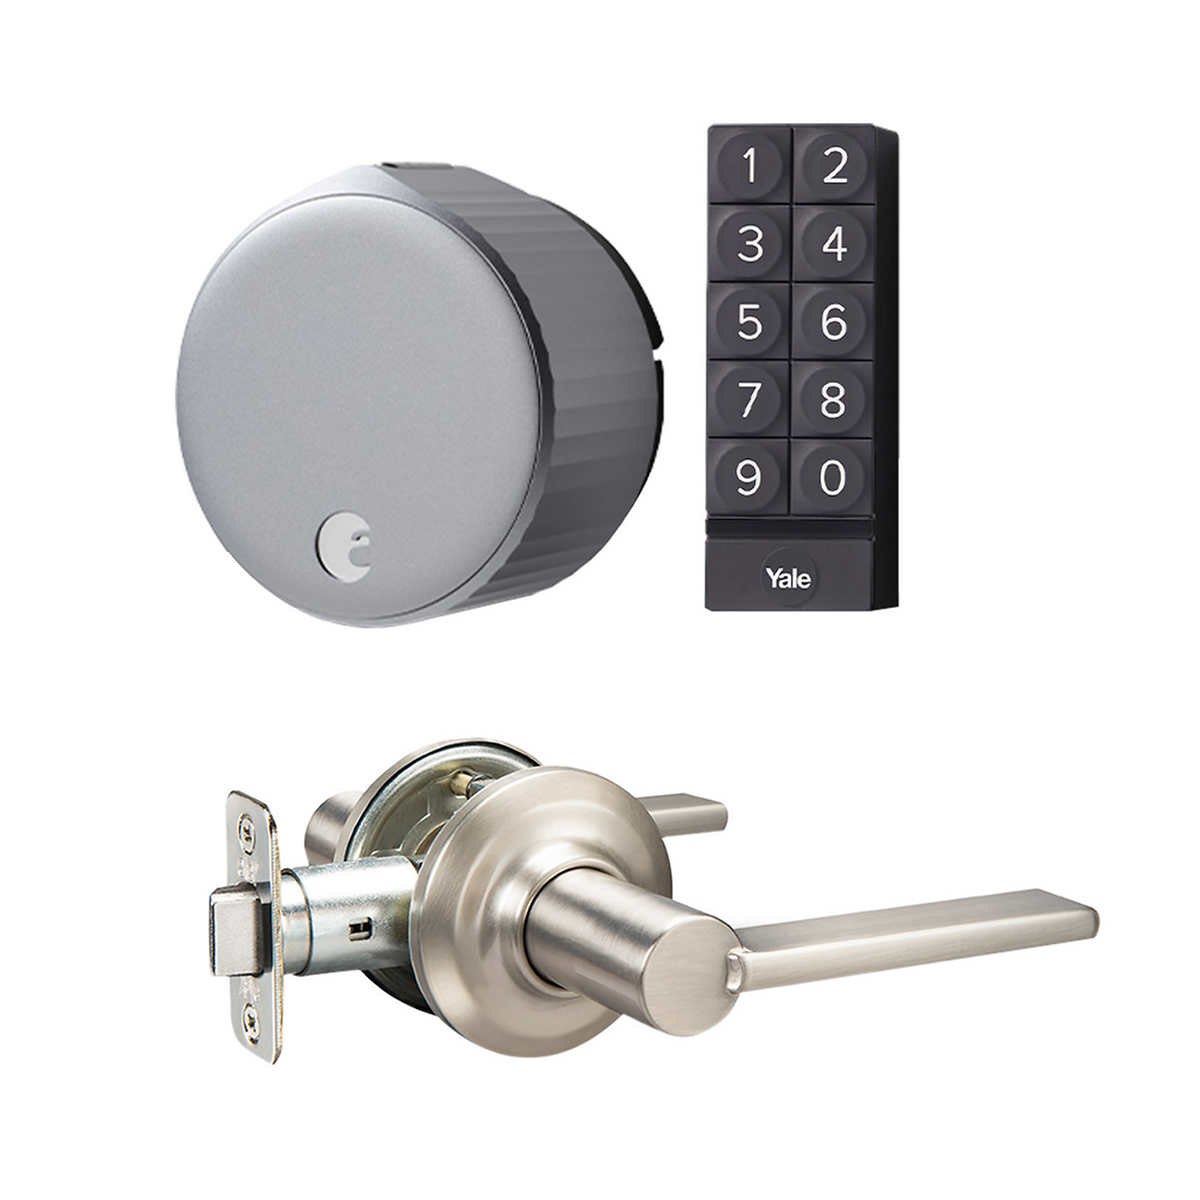 August Wi-Fi Smart Lock With Yale Keypad and Satin Nickel Door Lever | Costco